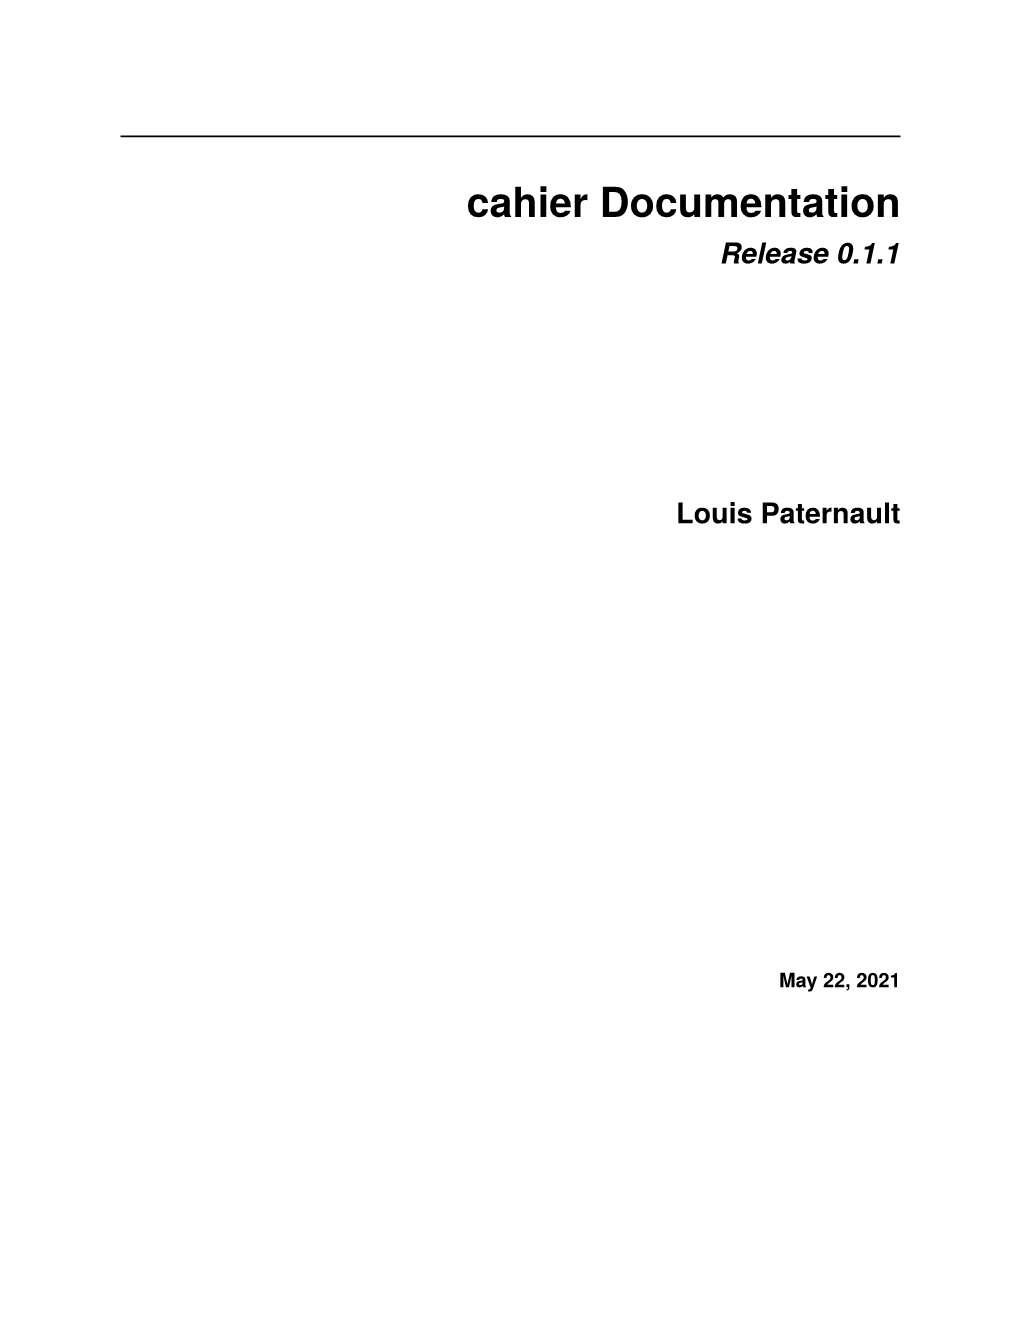 Cahier Documentation Release 0.1.1